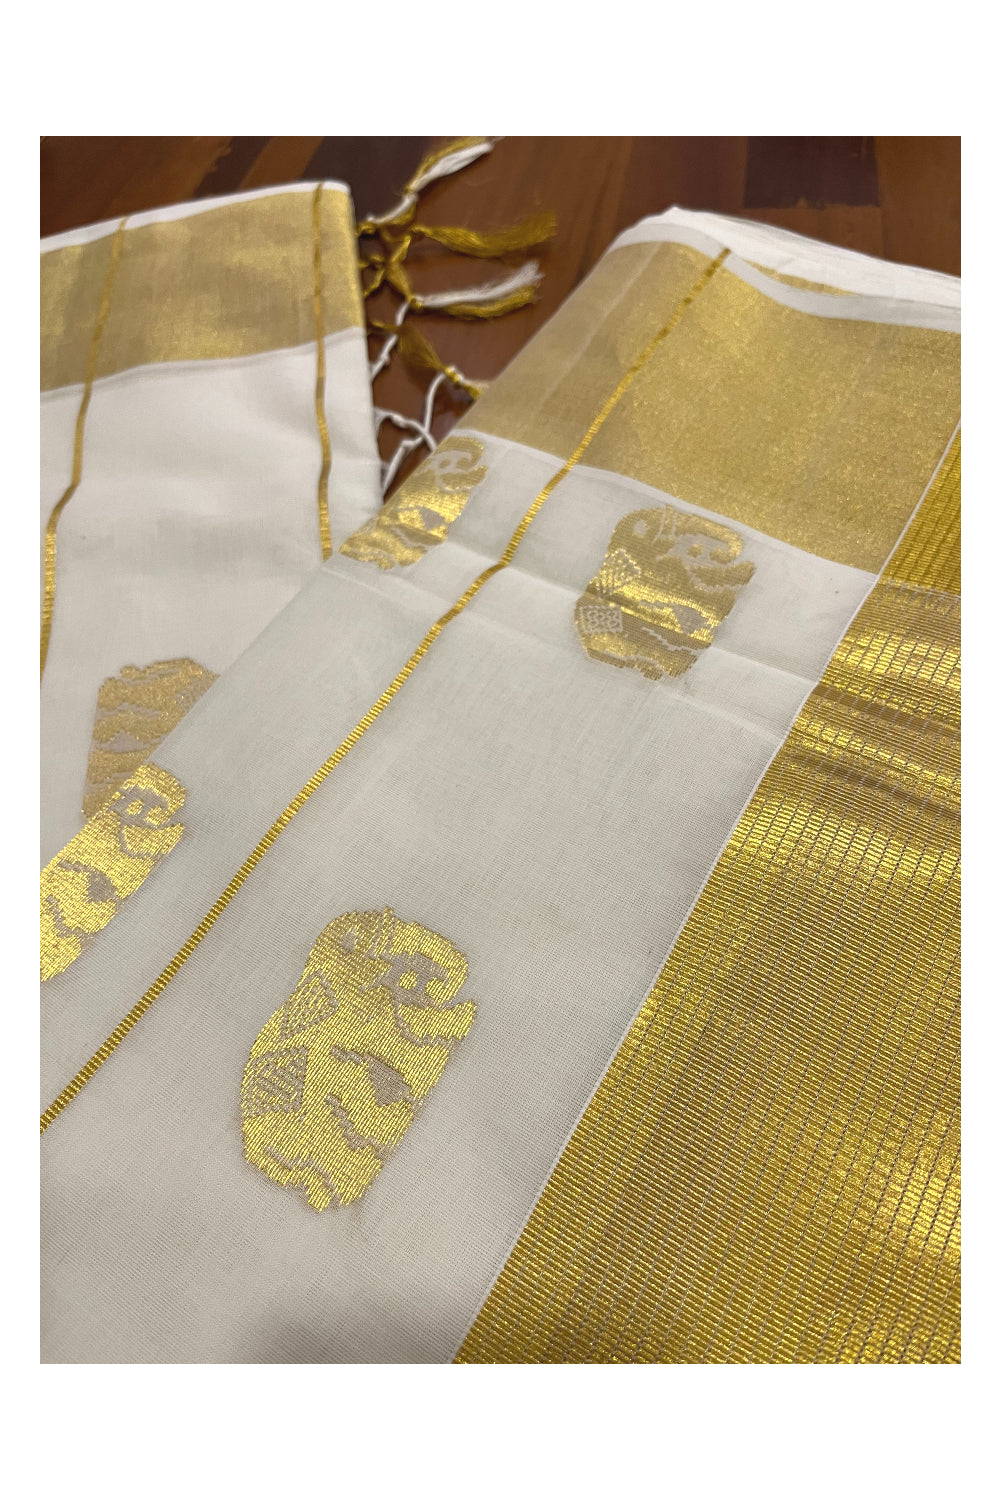 Southloom Premium Handloom Cotton Saree with Elephant Woven Works on Body